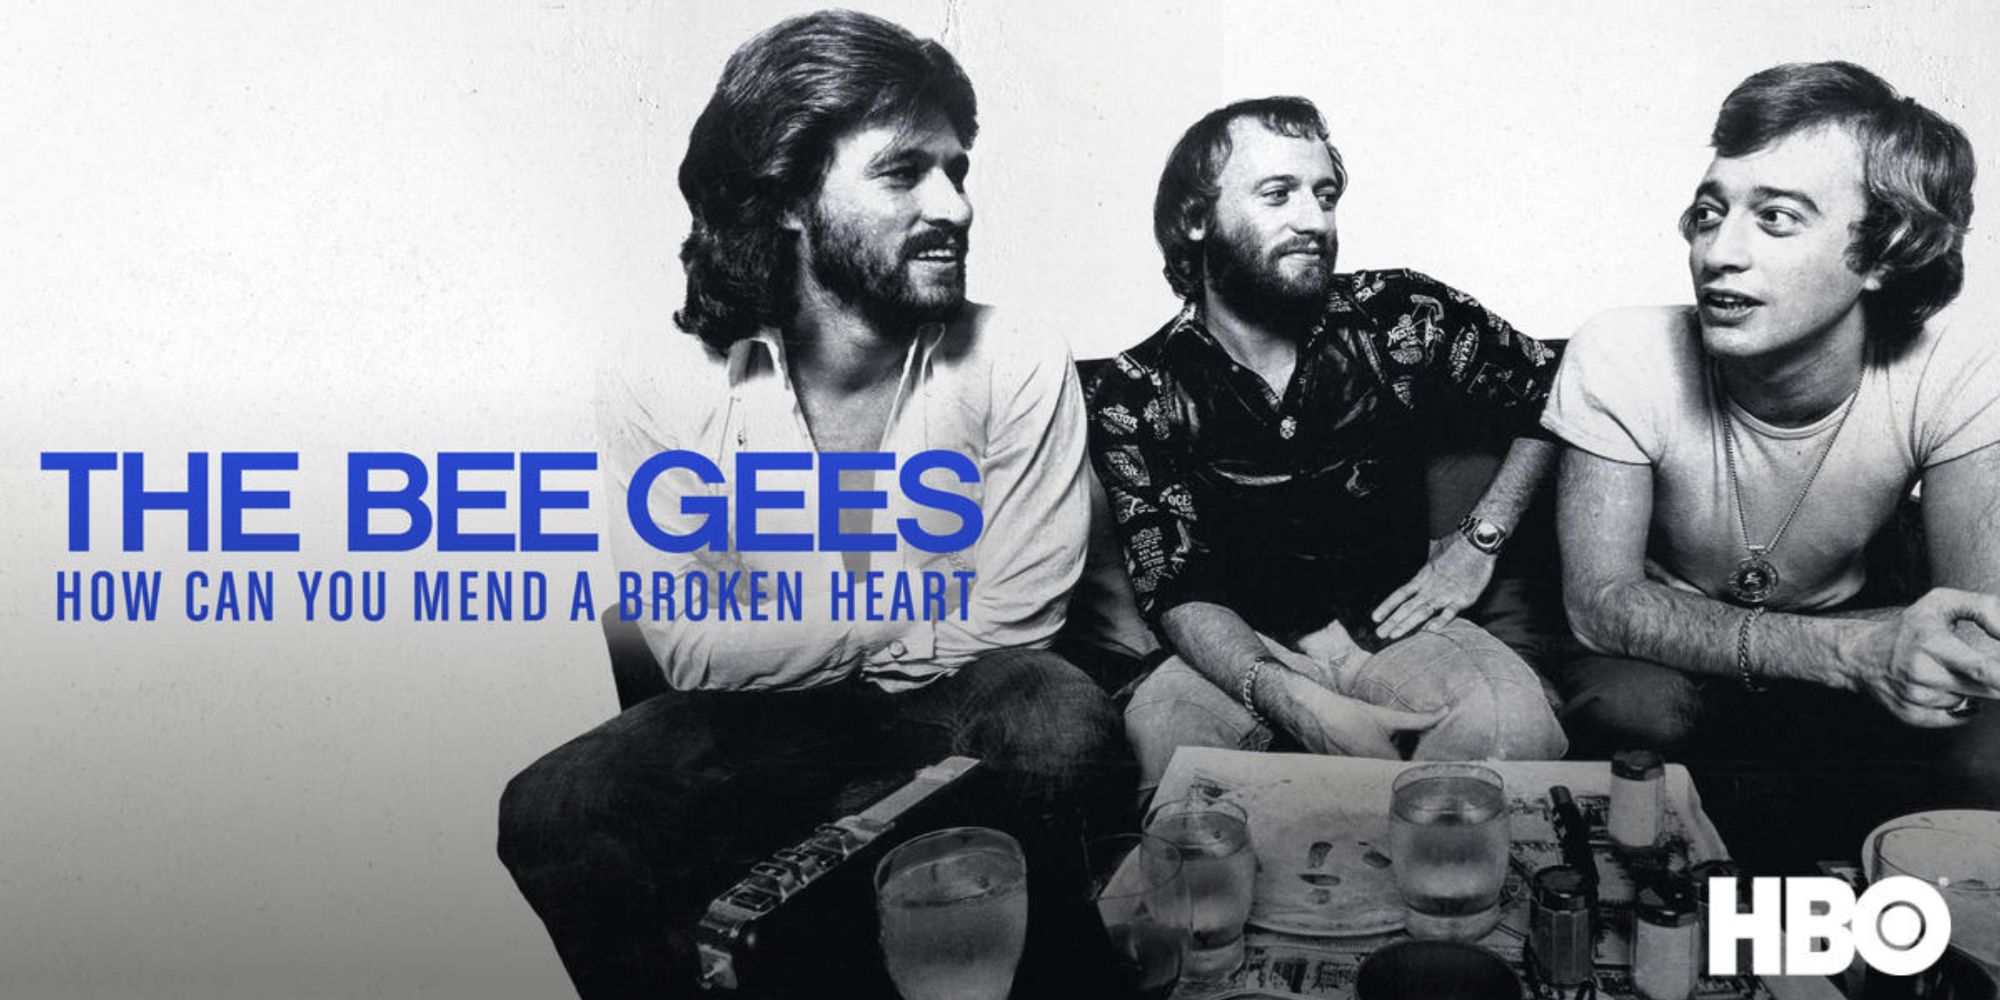 Promo image from The Bee Gees documentary